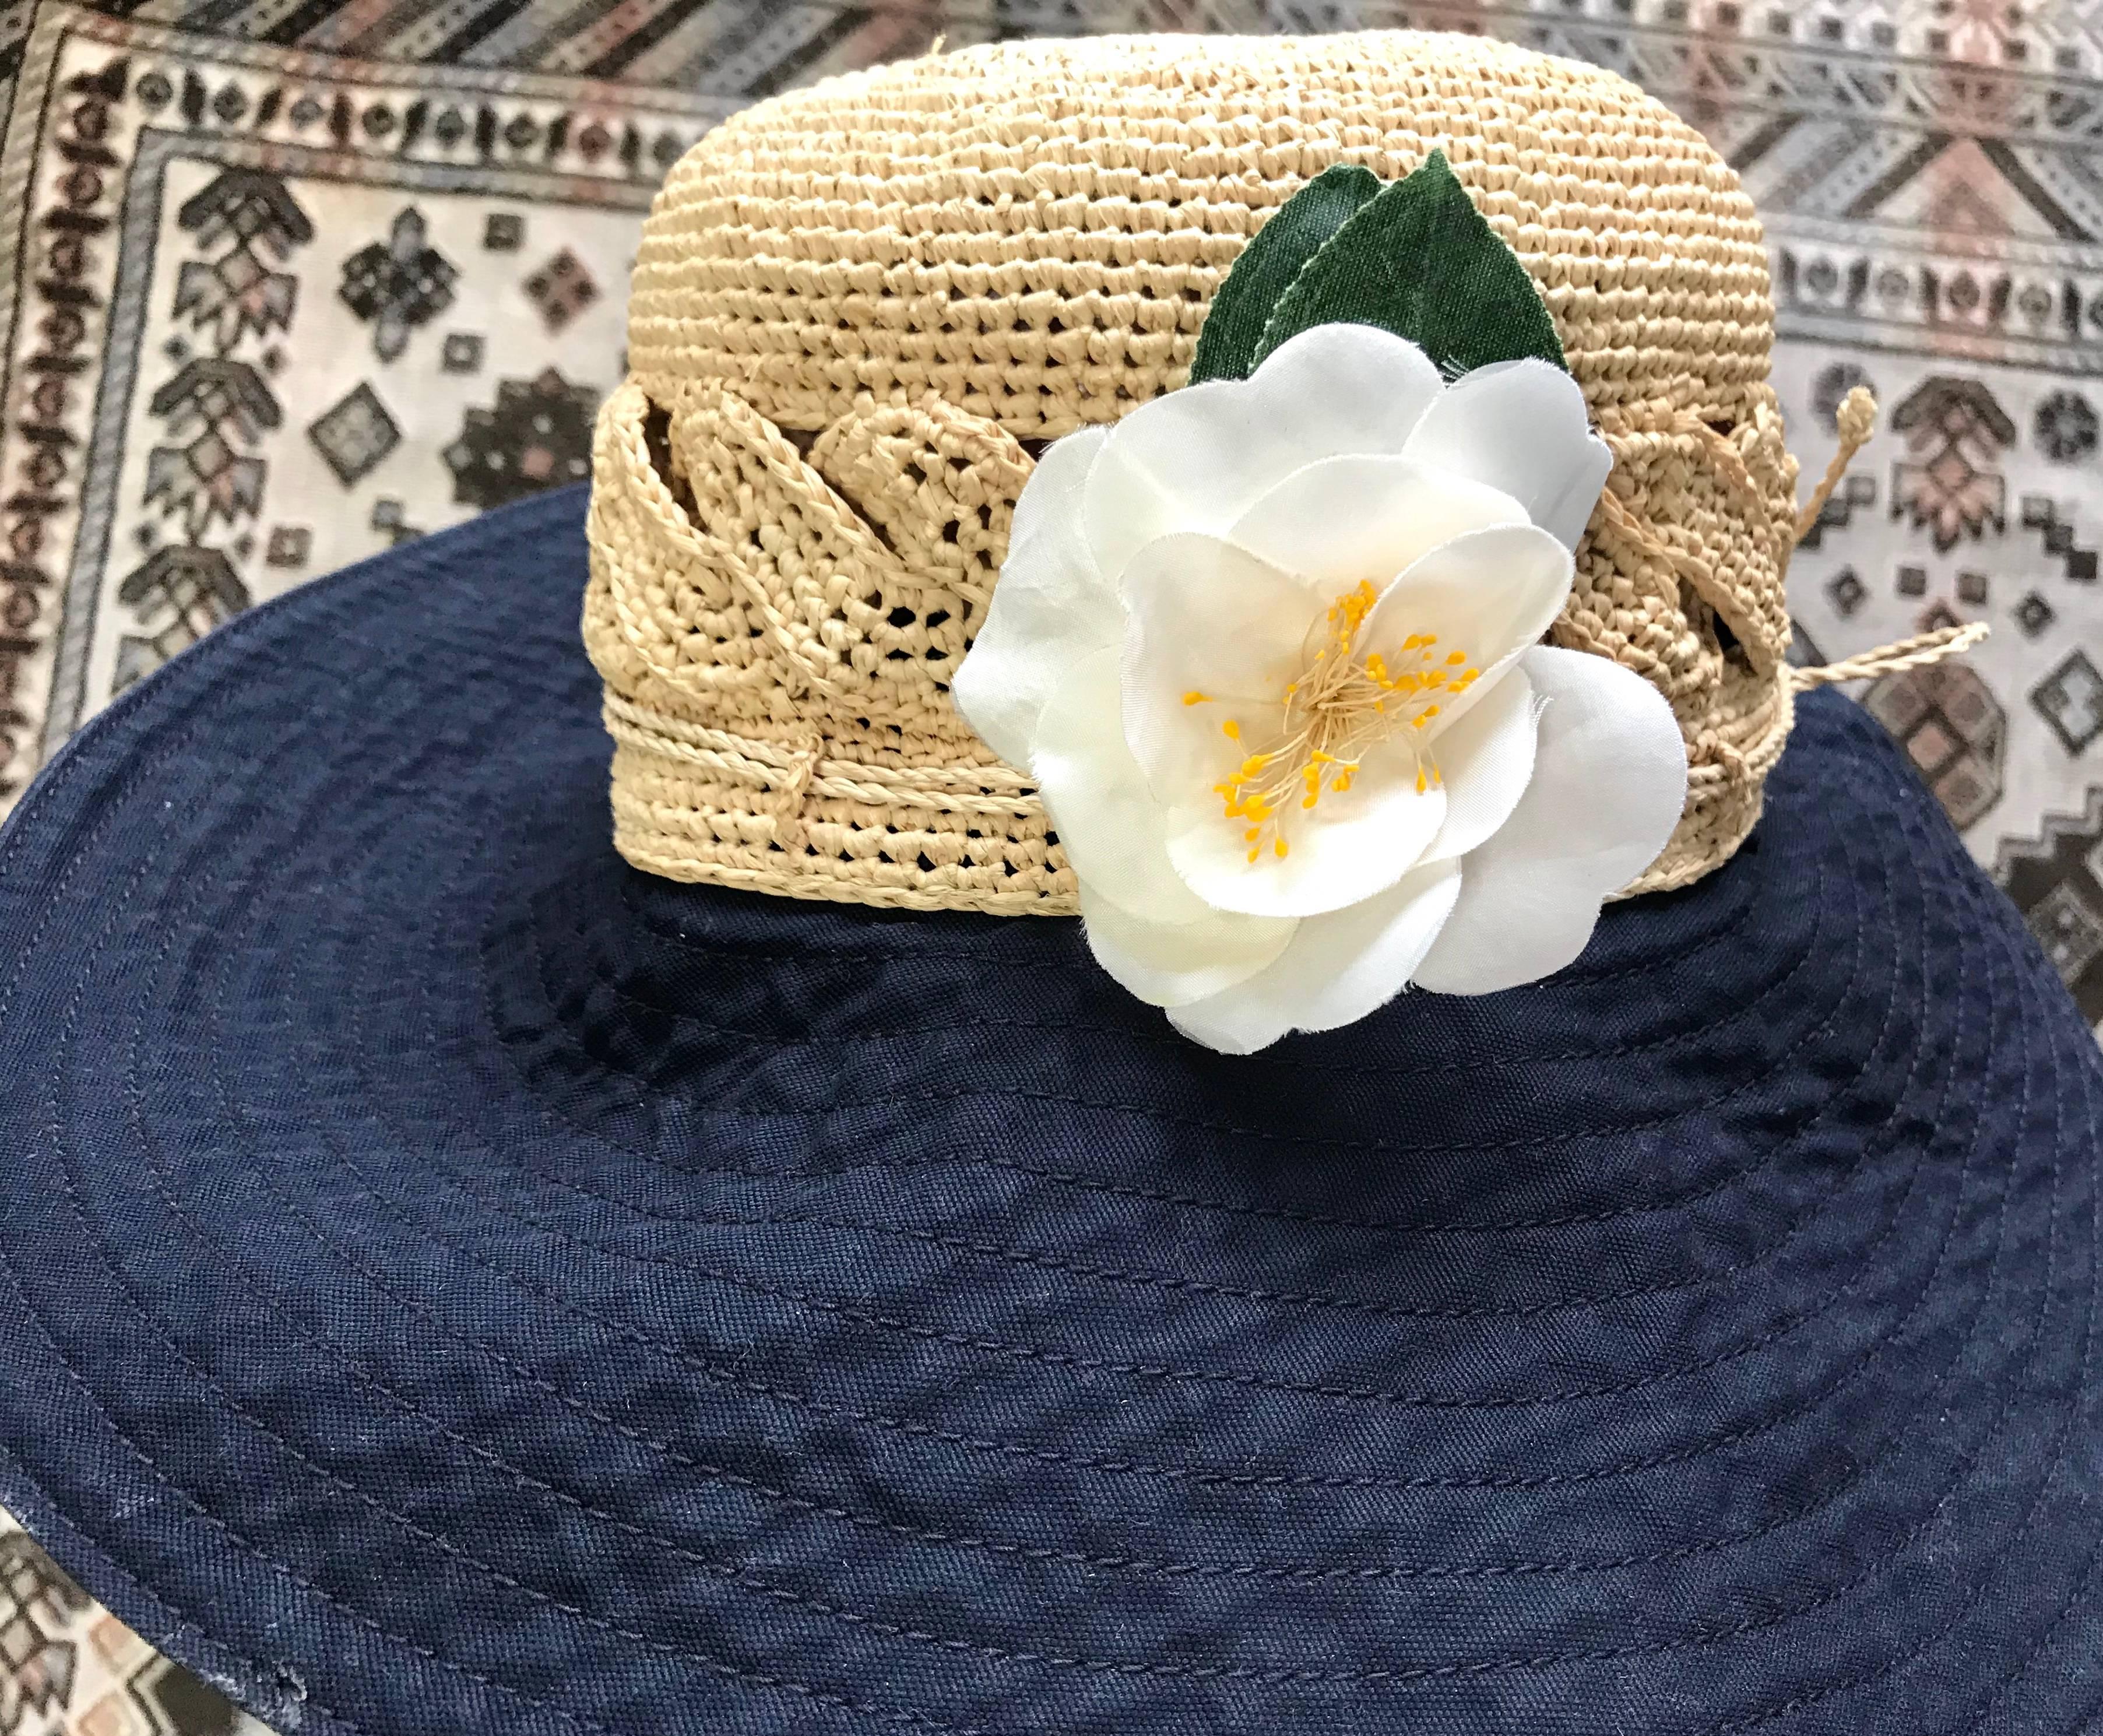 Chic Chanel vintage 1990's signature camellia white ivory silk brooch w/green leaves

Though there are partially water stains seen on some of the petals, overall, it is still in a good vintage condition without major or noticeable damages.

Made in